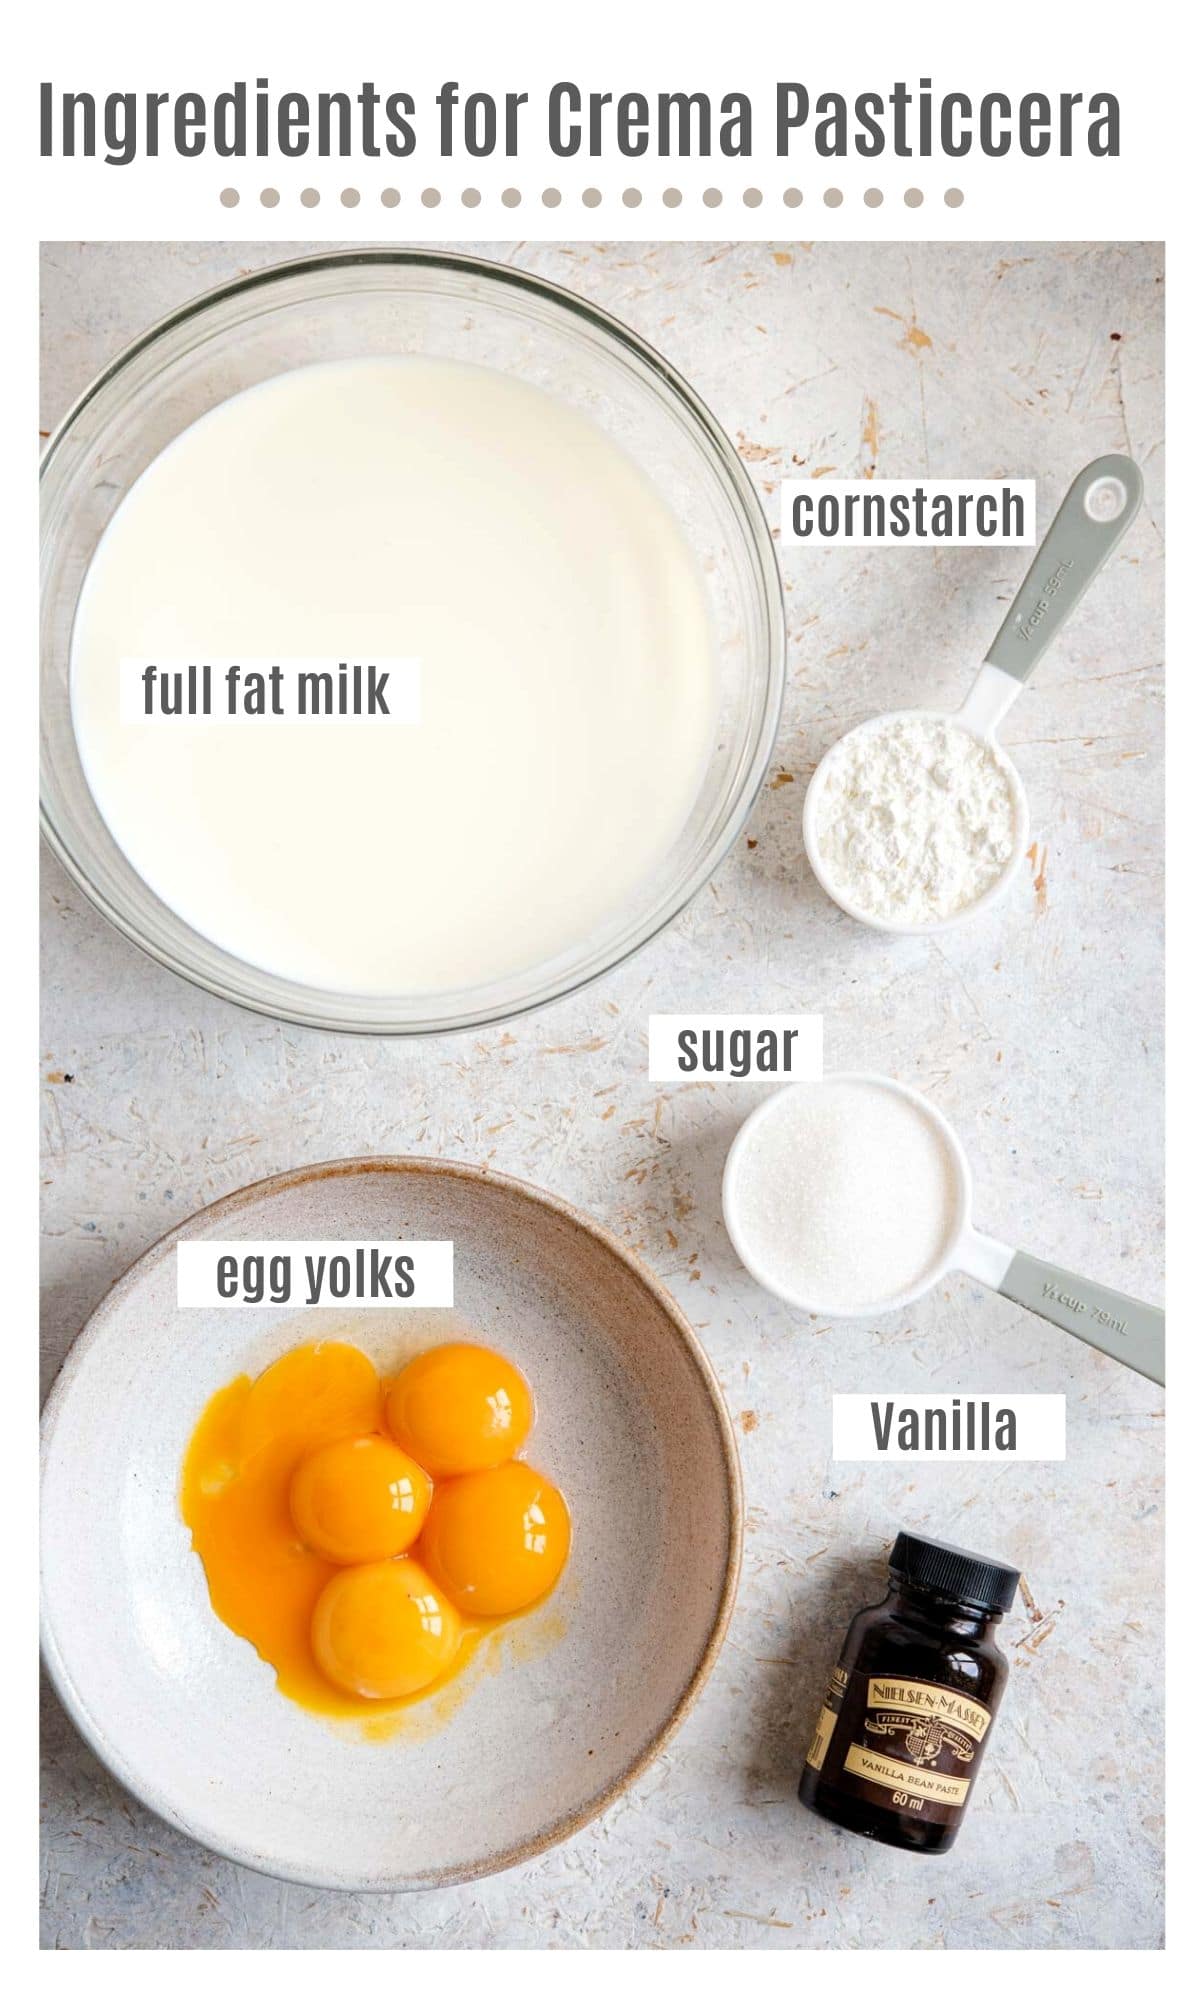 An overhead shot of all the ingredients you need to make Crema Pasticcera (Italian pastry cream)